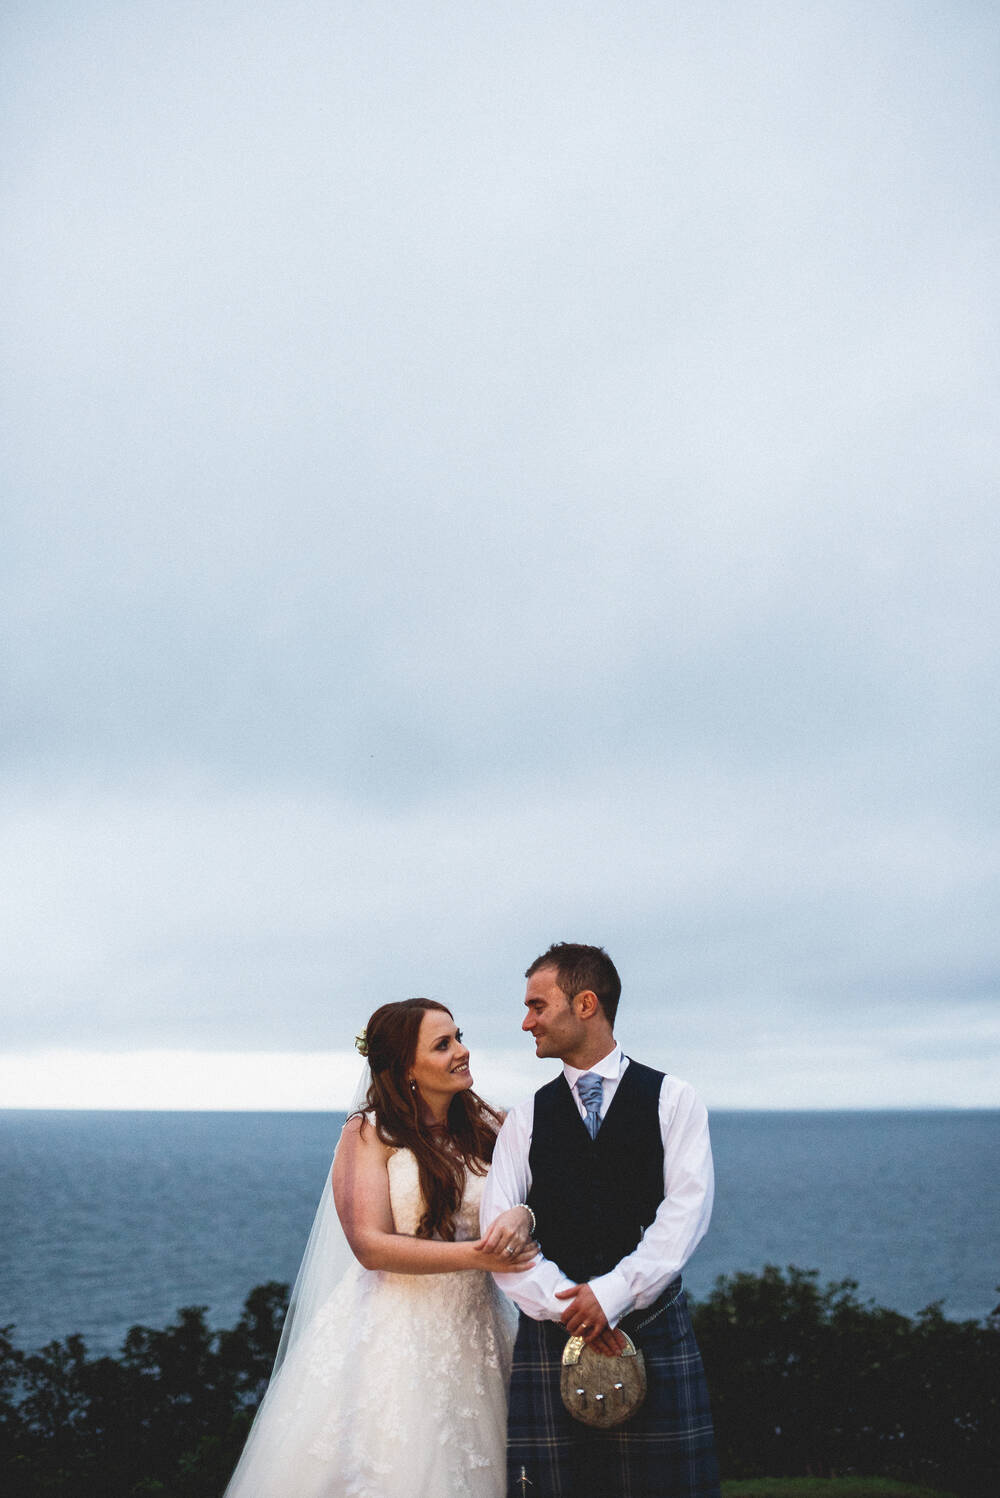 Michael and Louise Morran, married at Culzean Castle & Country Park 